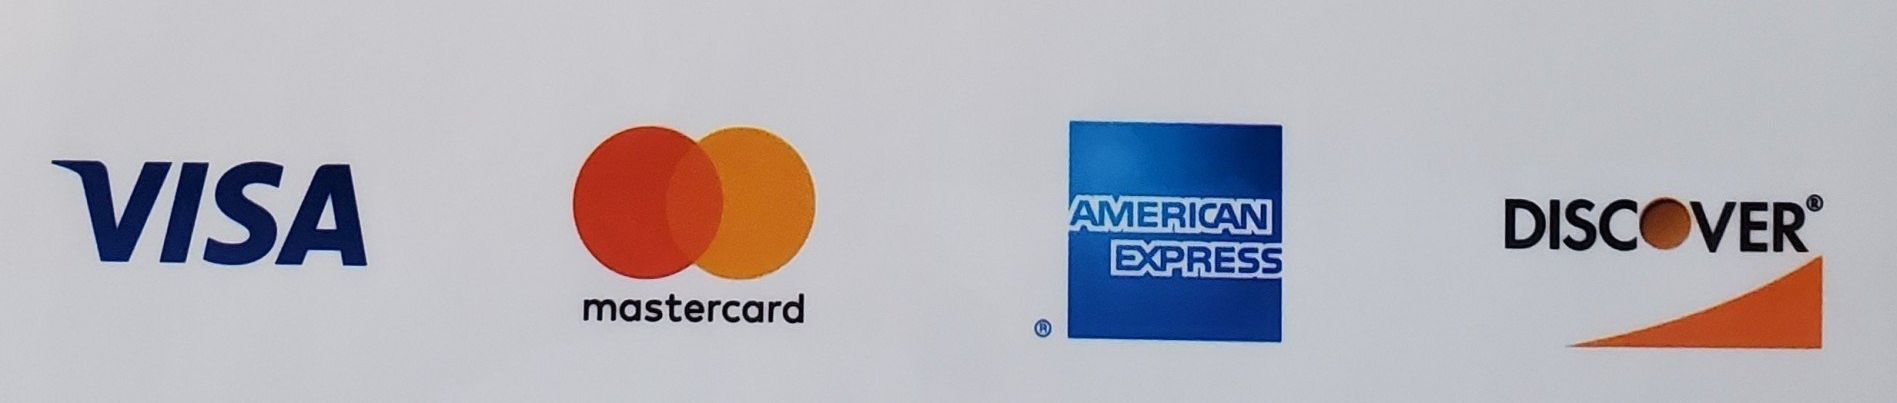 a visa mastercard and discover logo on a white background